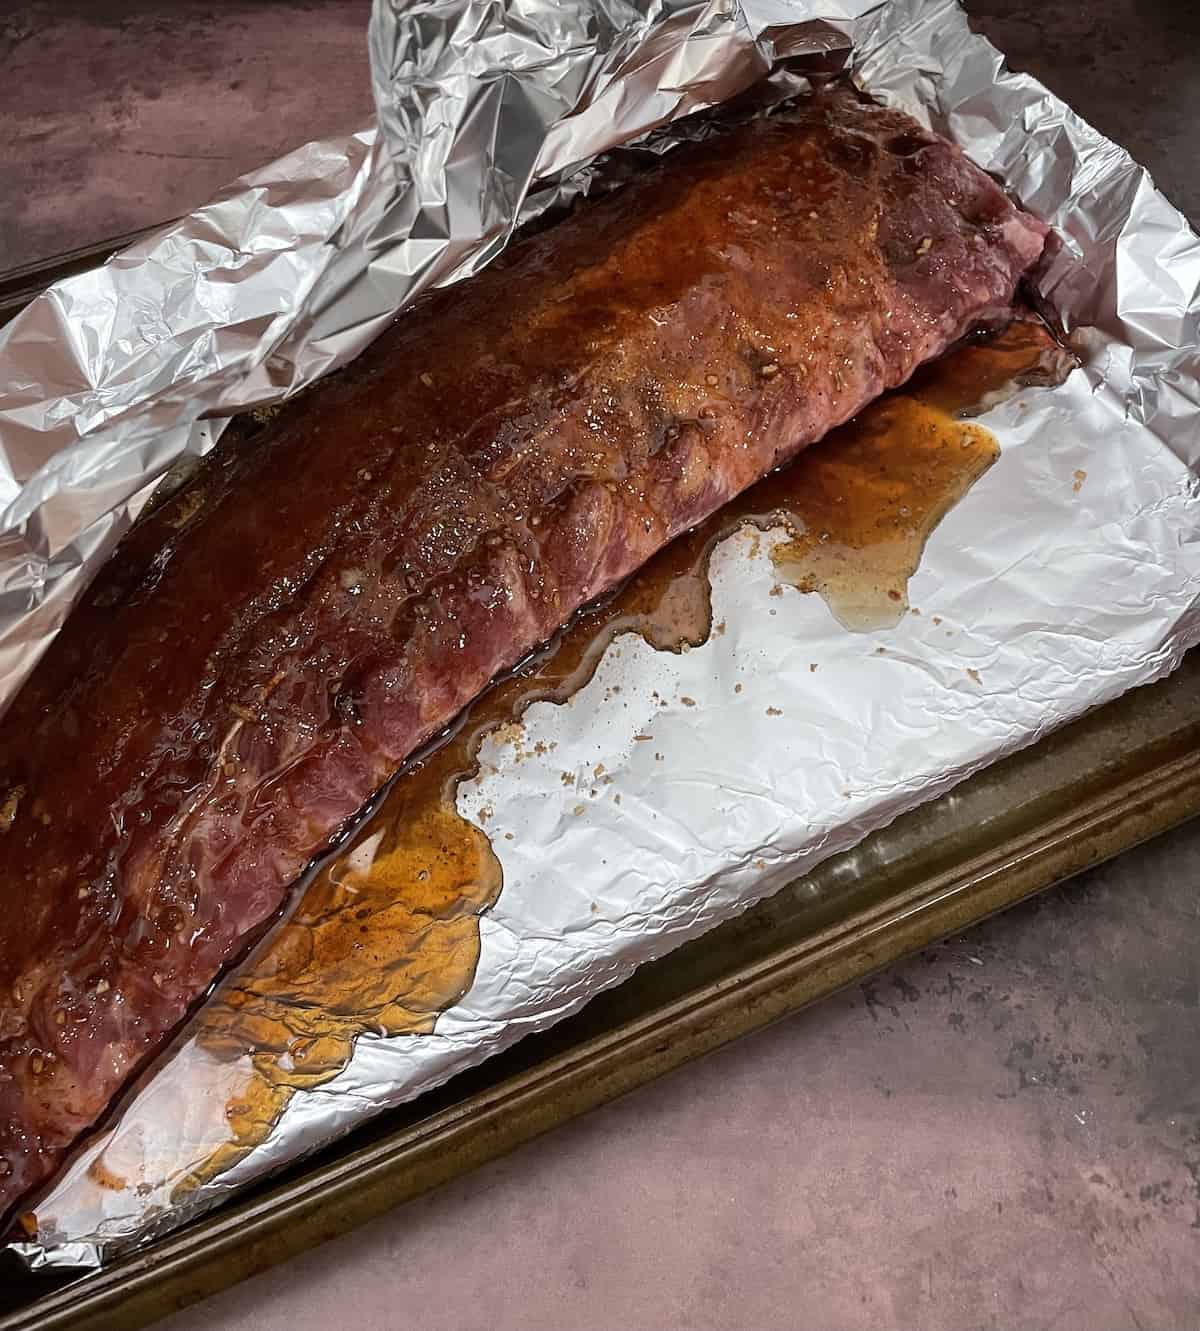 Ribs with seasoning and sauce on foil on baking sheet.